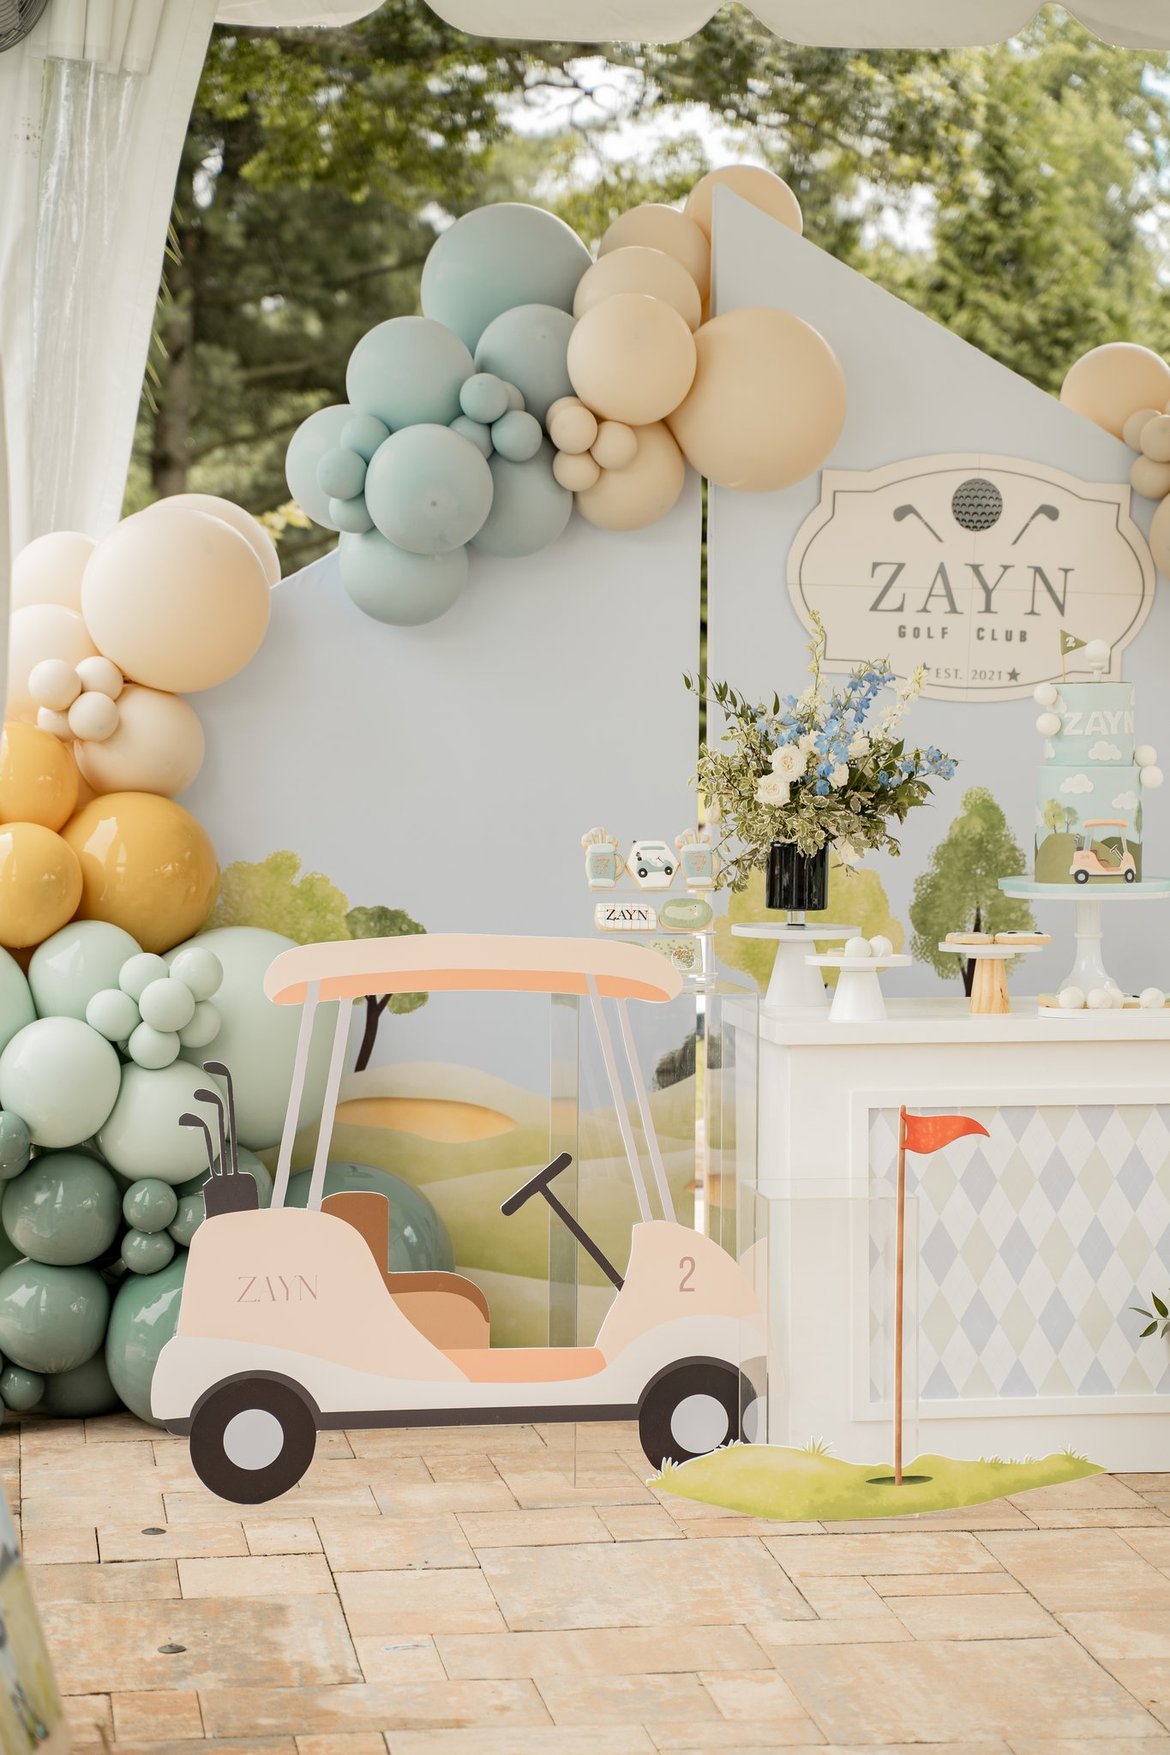 Adorable golf cart party decoration featured on Pretty My Party.